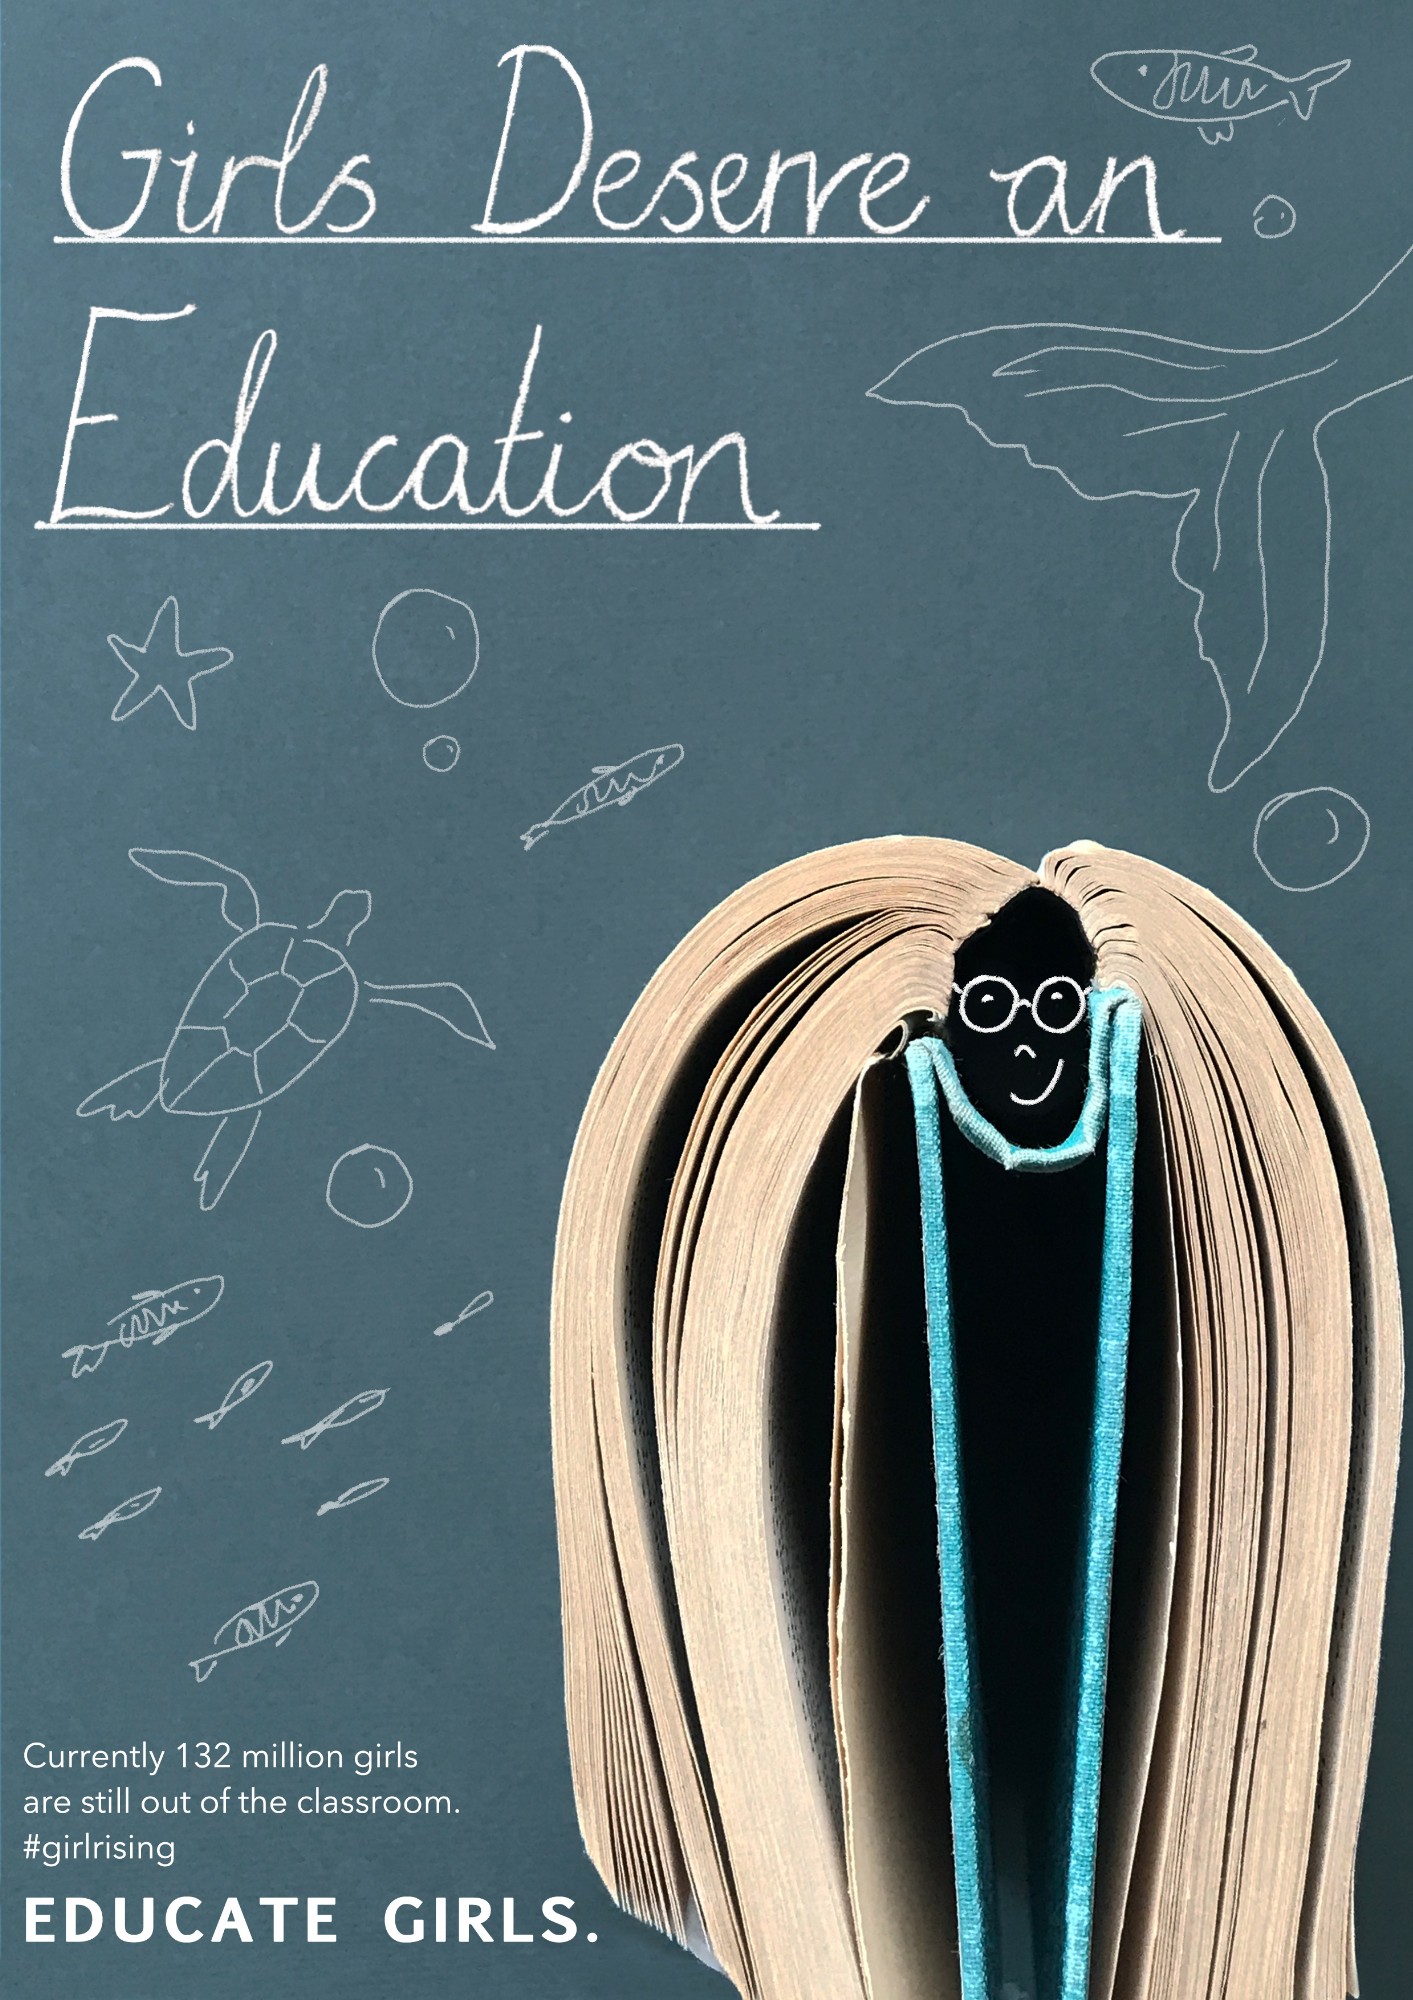 Speculative poster campaign promoting girls’ education across the world. Created by photographing an adapted book.